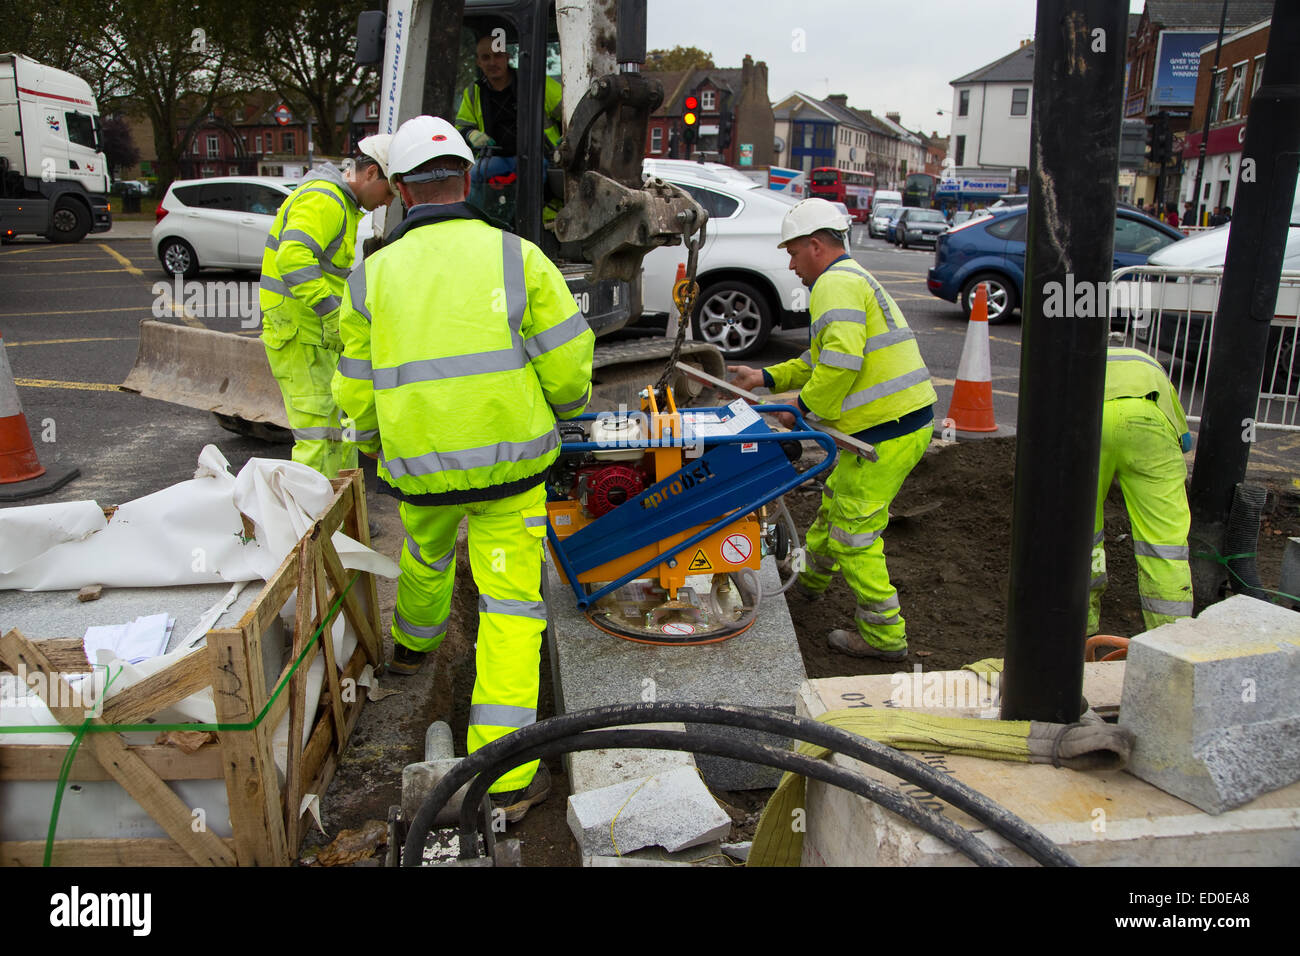 LONDON - OCTOBER 15TH: Unidentified workman using a sprobst vacuum stone magnet by Turnpike lane station on October 15th, 2014 i Stock Photo